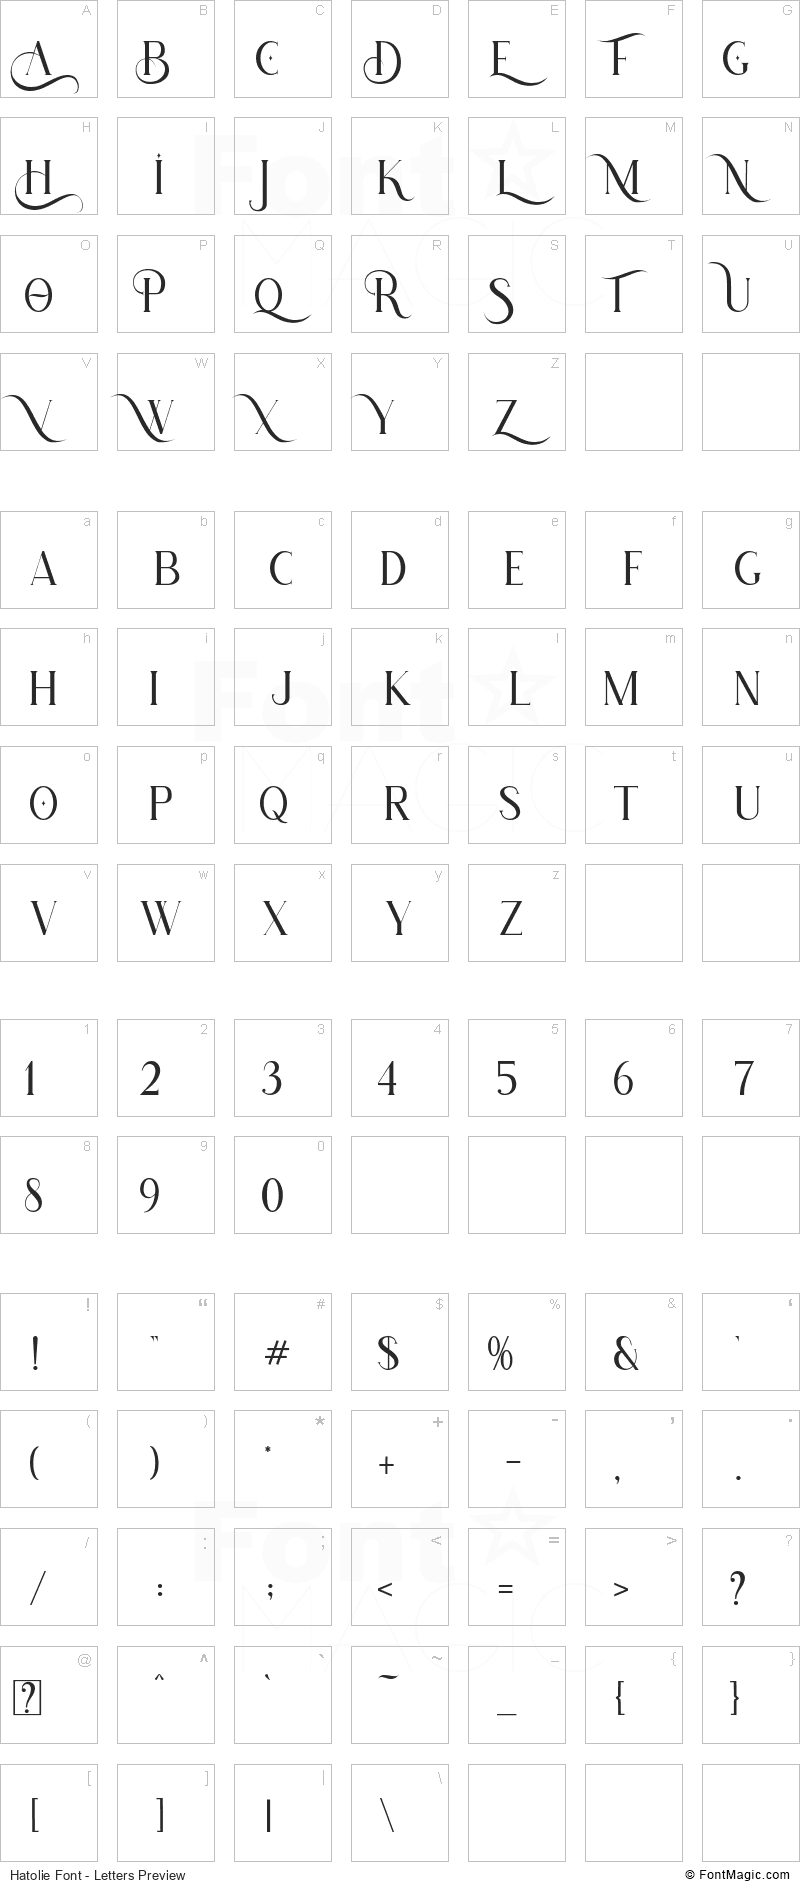 Hatolie Font - All Latters Preview Chart